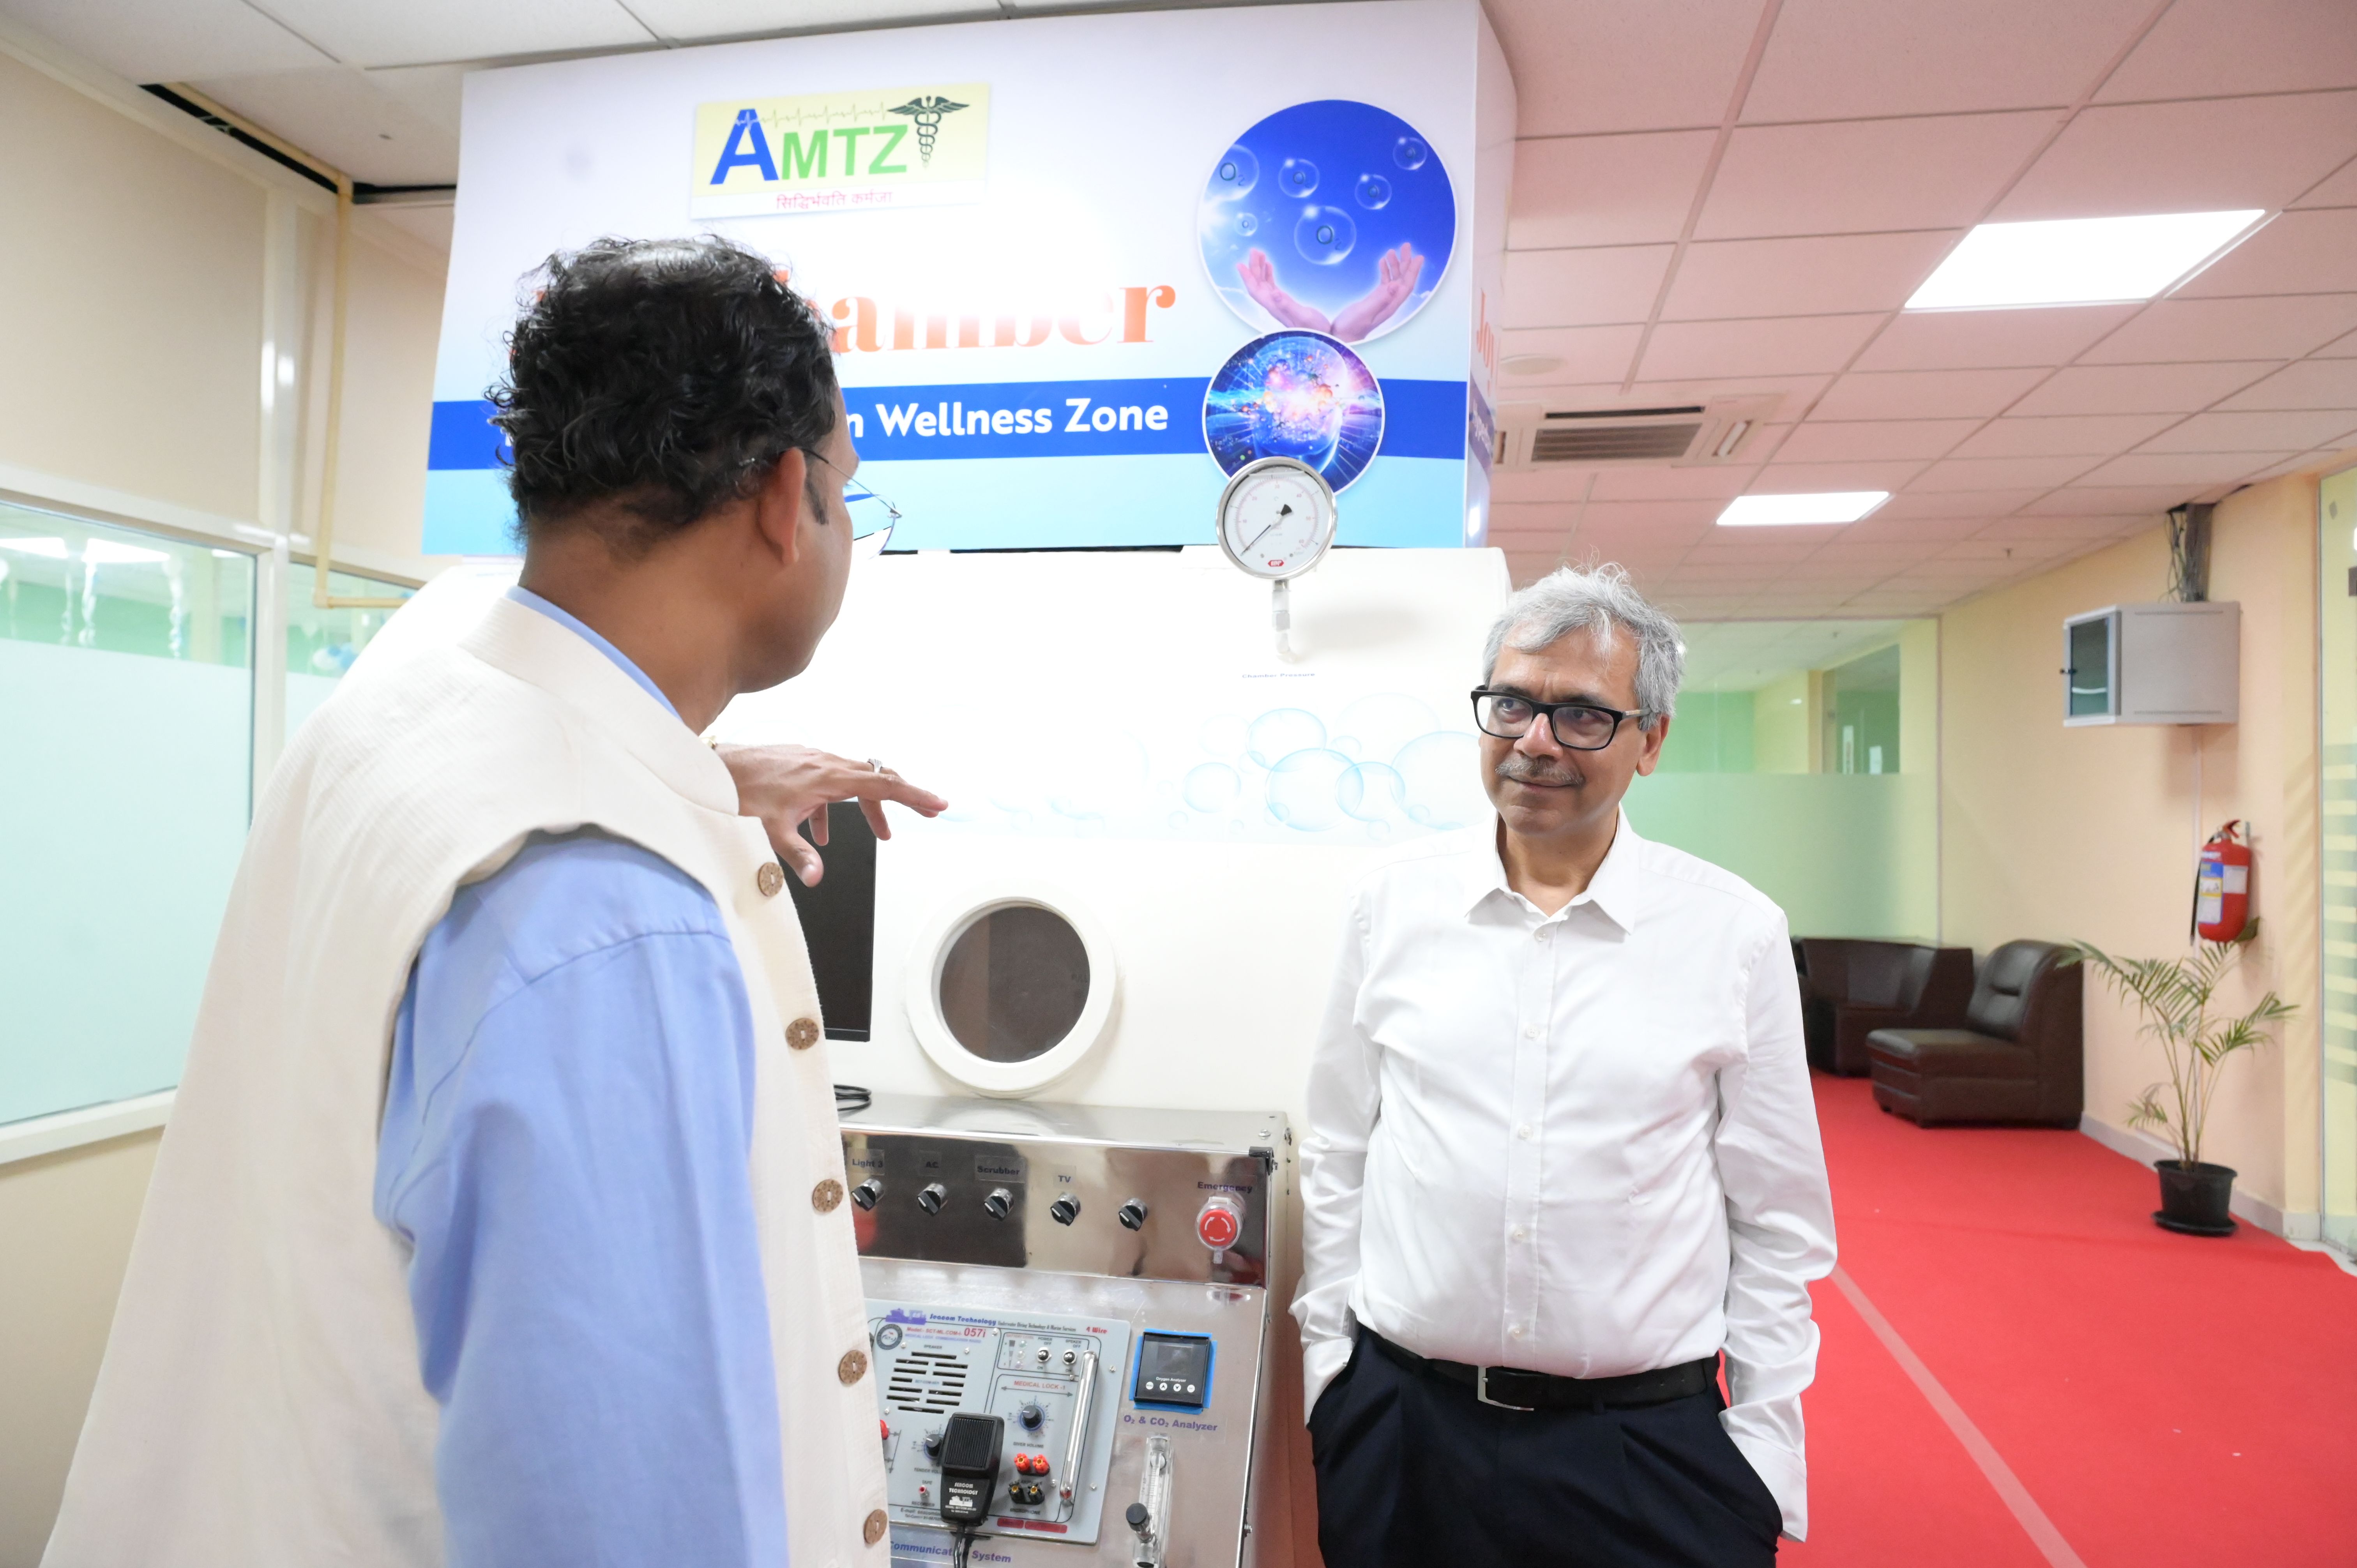 Dr. Jitendra Sharma meets Dr. Rajiv Bahl, DG of ICMR, at the AMTZ Advanced Technology campus to discuss Health Care and Medical Care in India